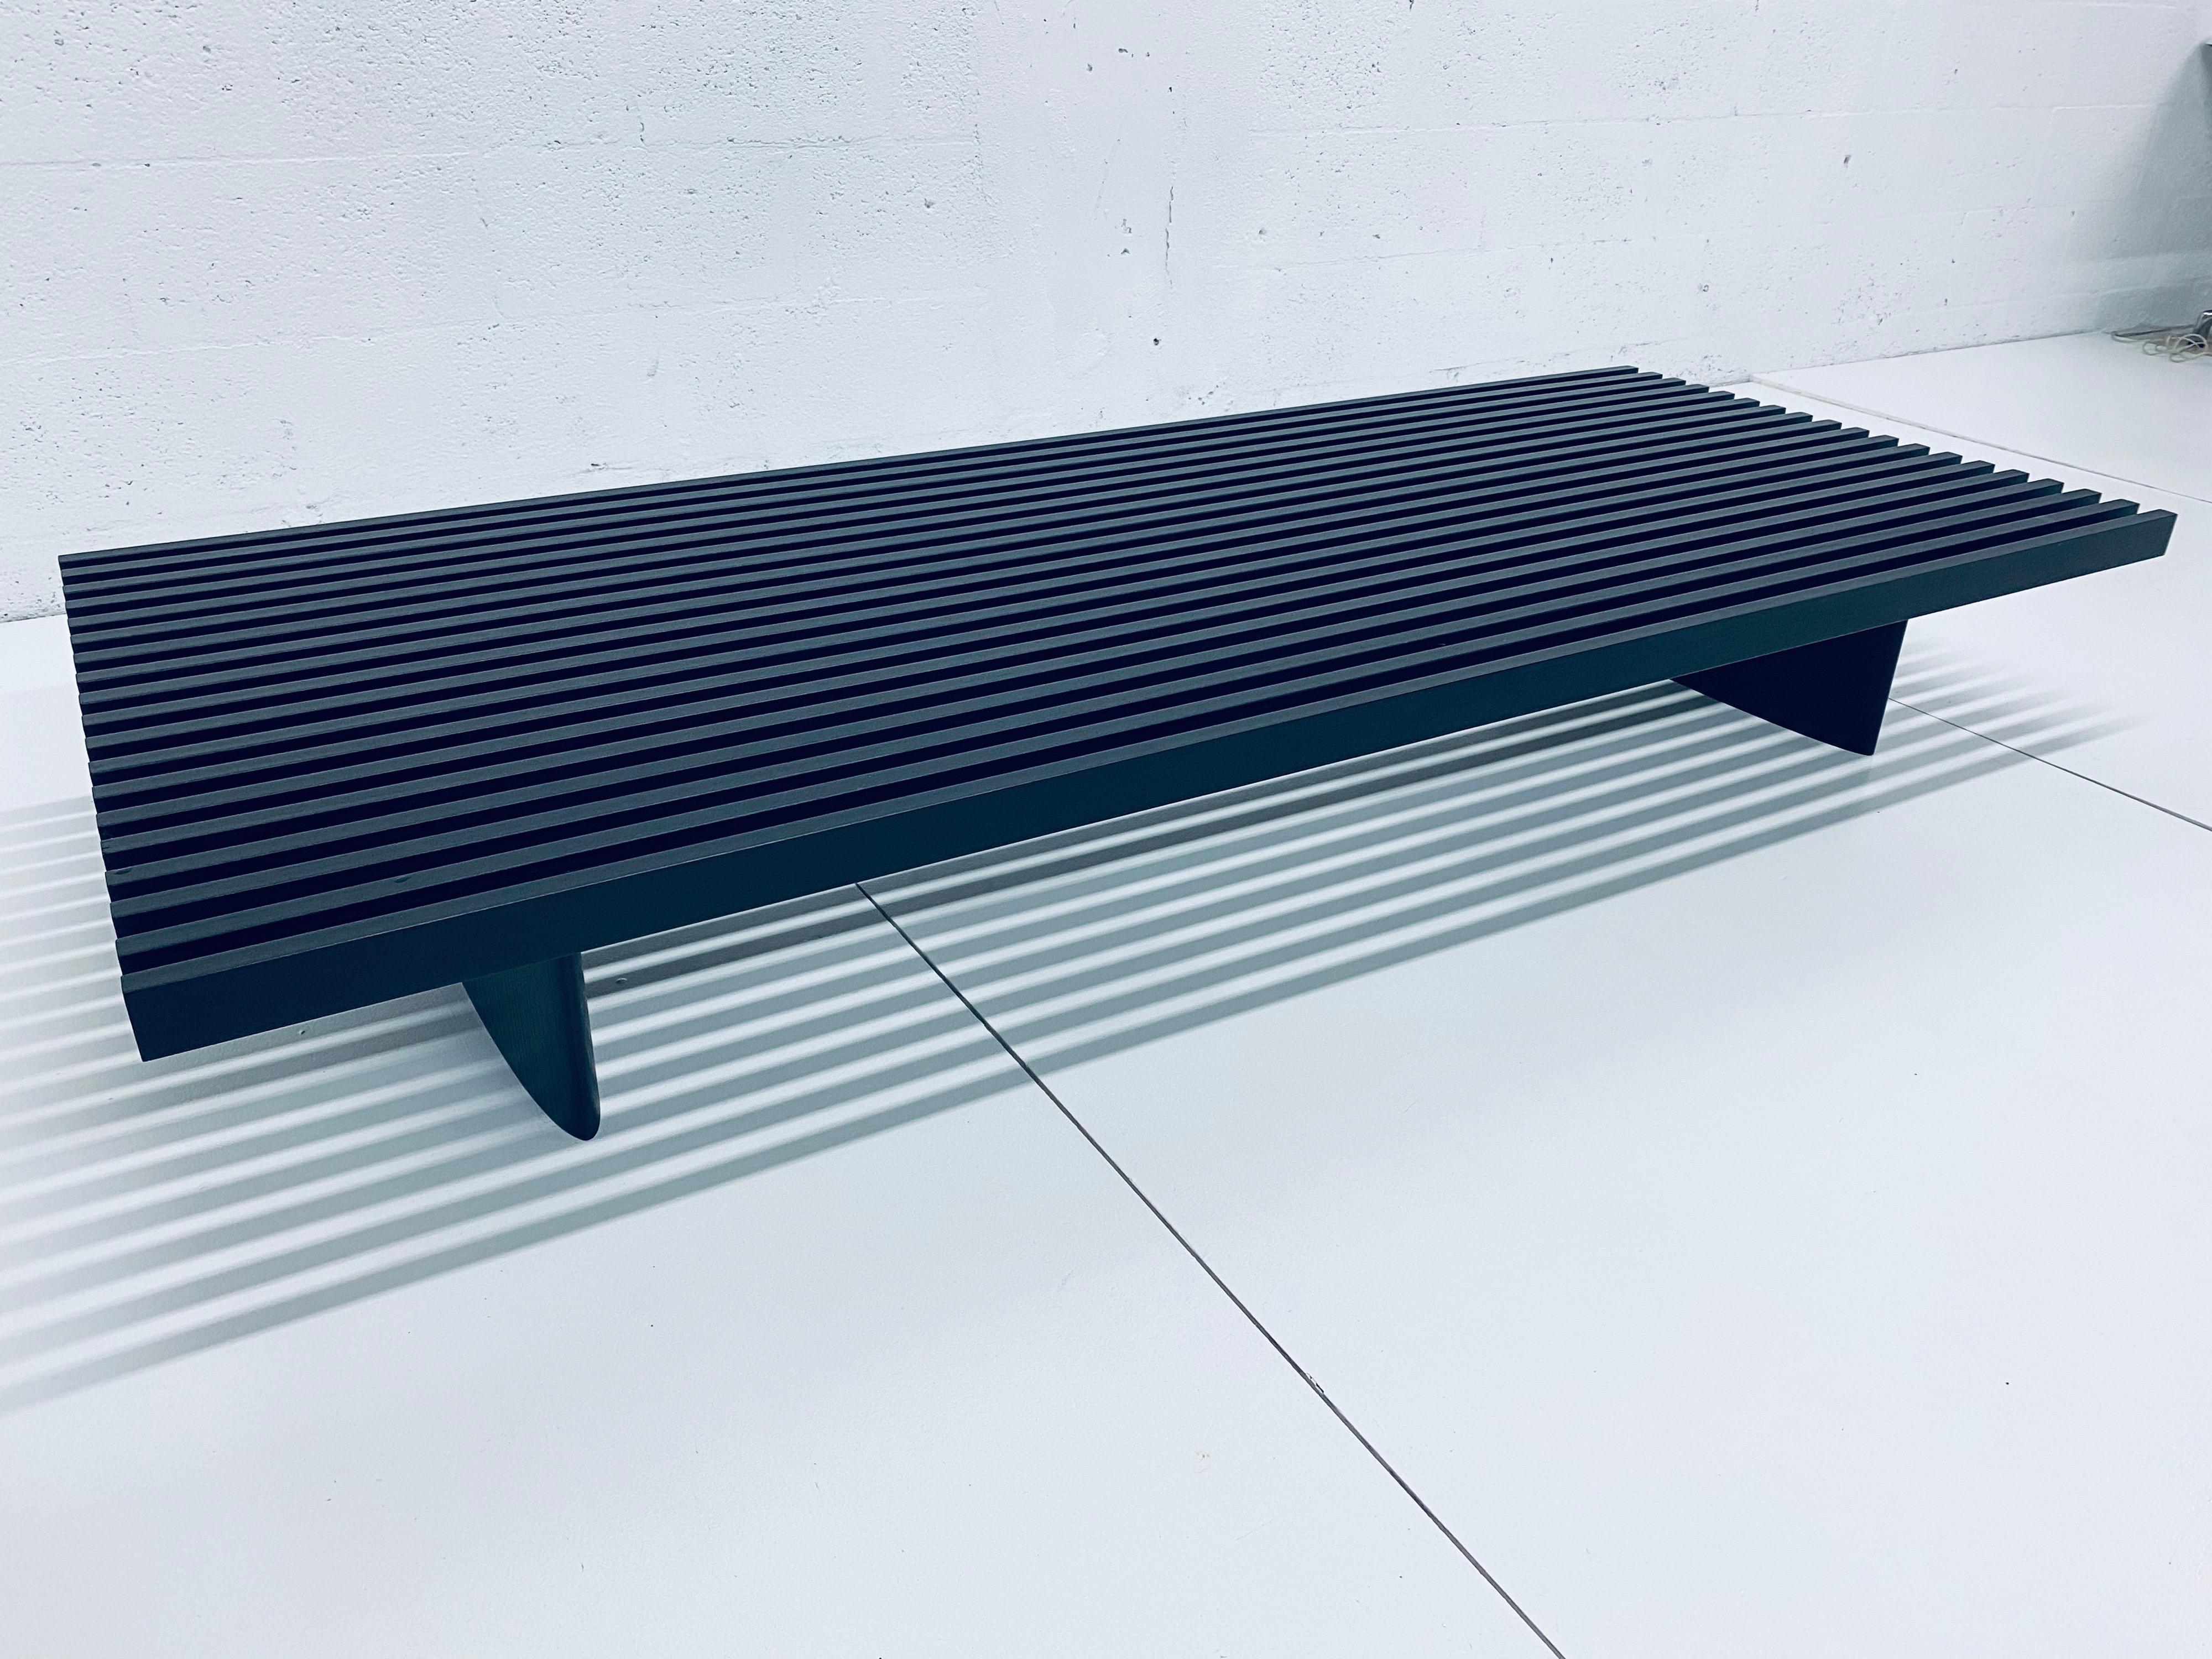 Ebony stained oak 514 Refolo coffee table or bench originally designed by Charlotte Perriand in 1953 and produced by Cassina in 2004. The surface consists of nineteen short slats arranged parallel: use as a table, as a bench or padded unit by simply